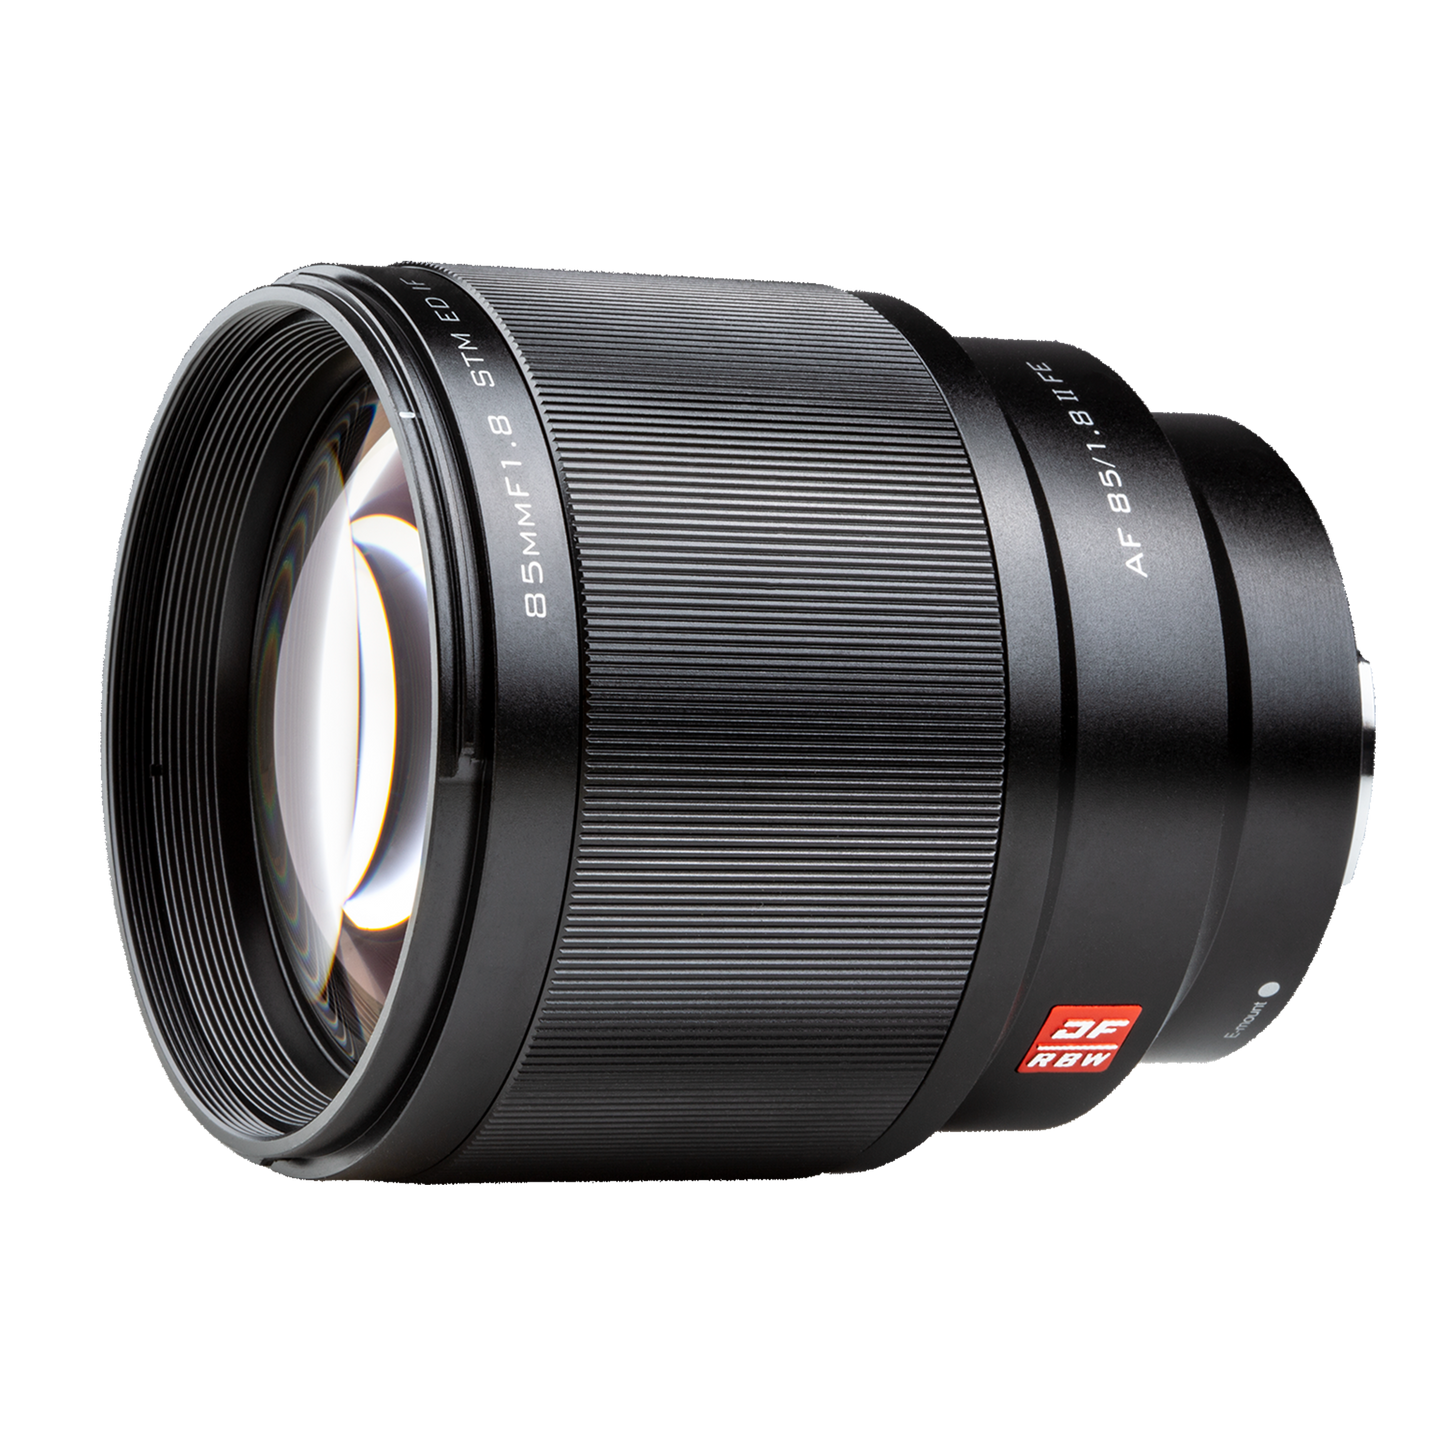 Viltrox lens FE-85mm f/1.8 with Sony E-mount